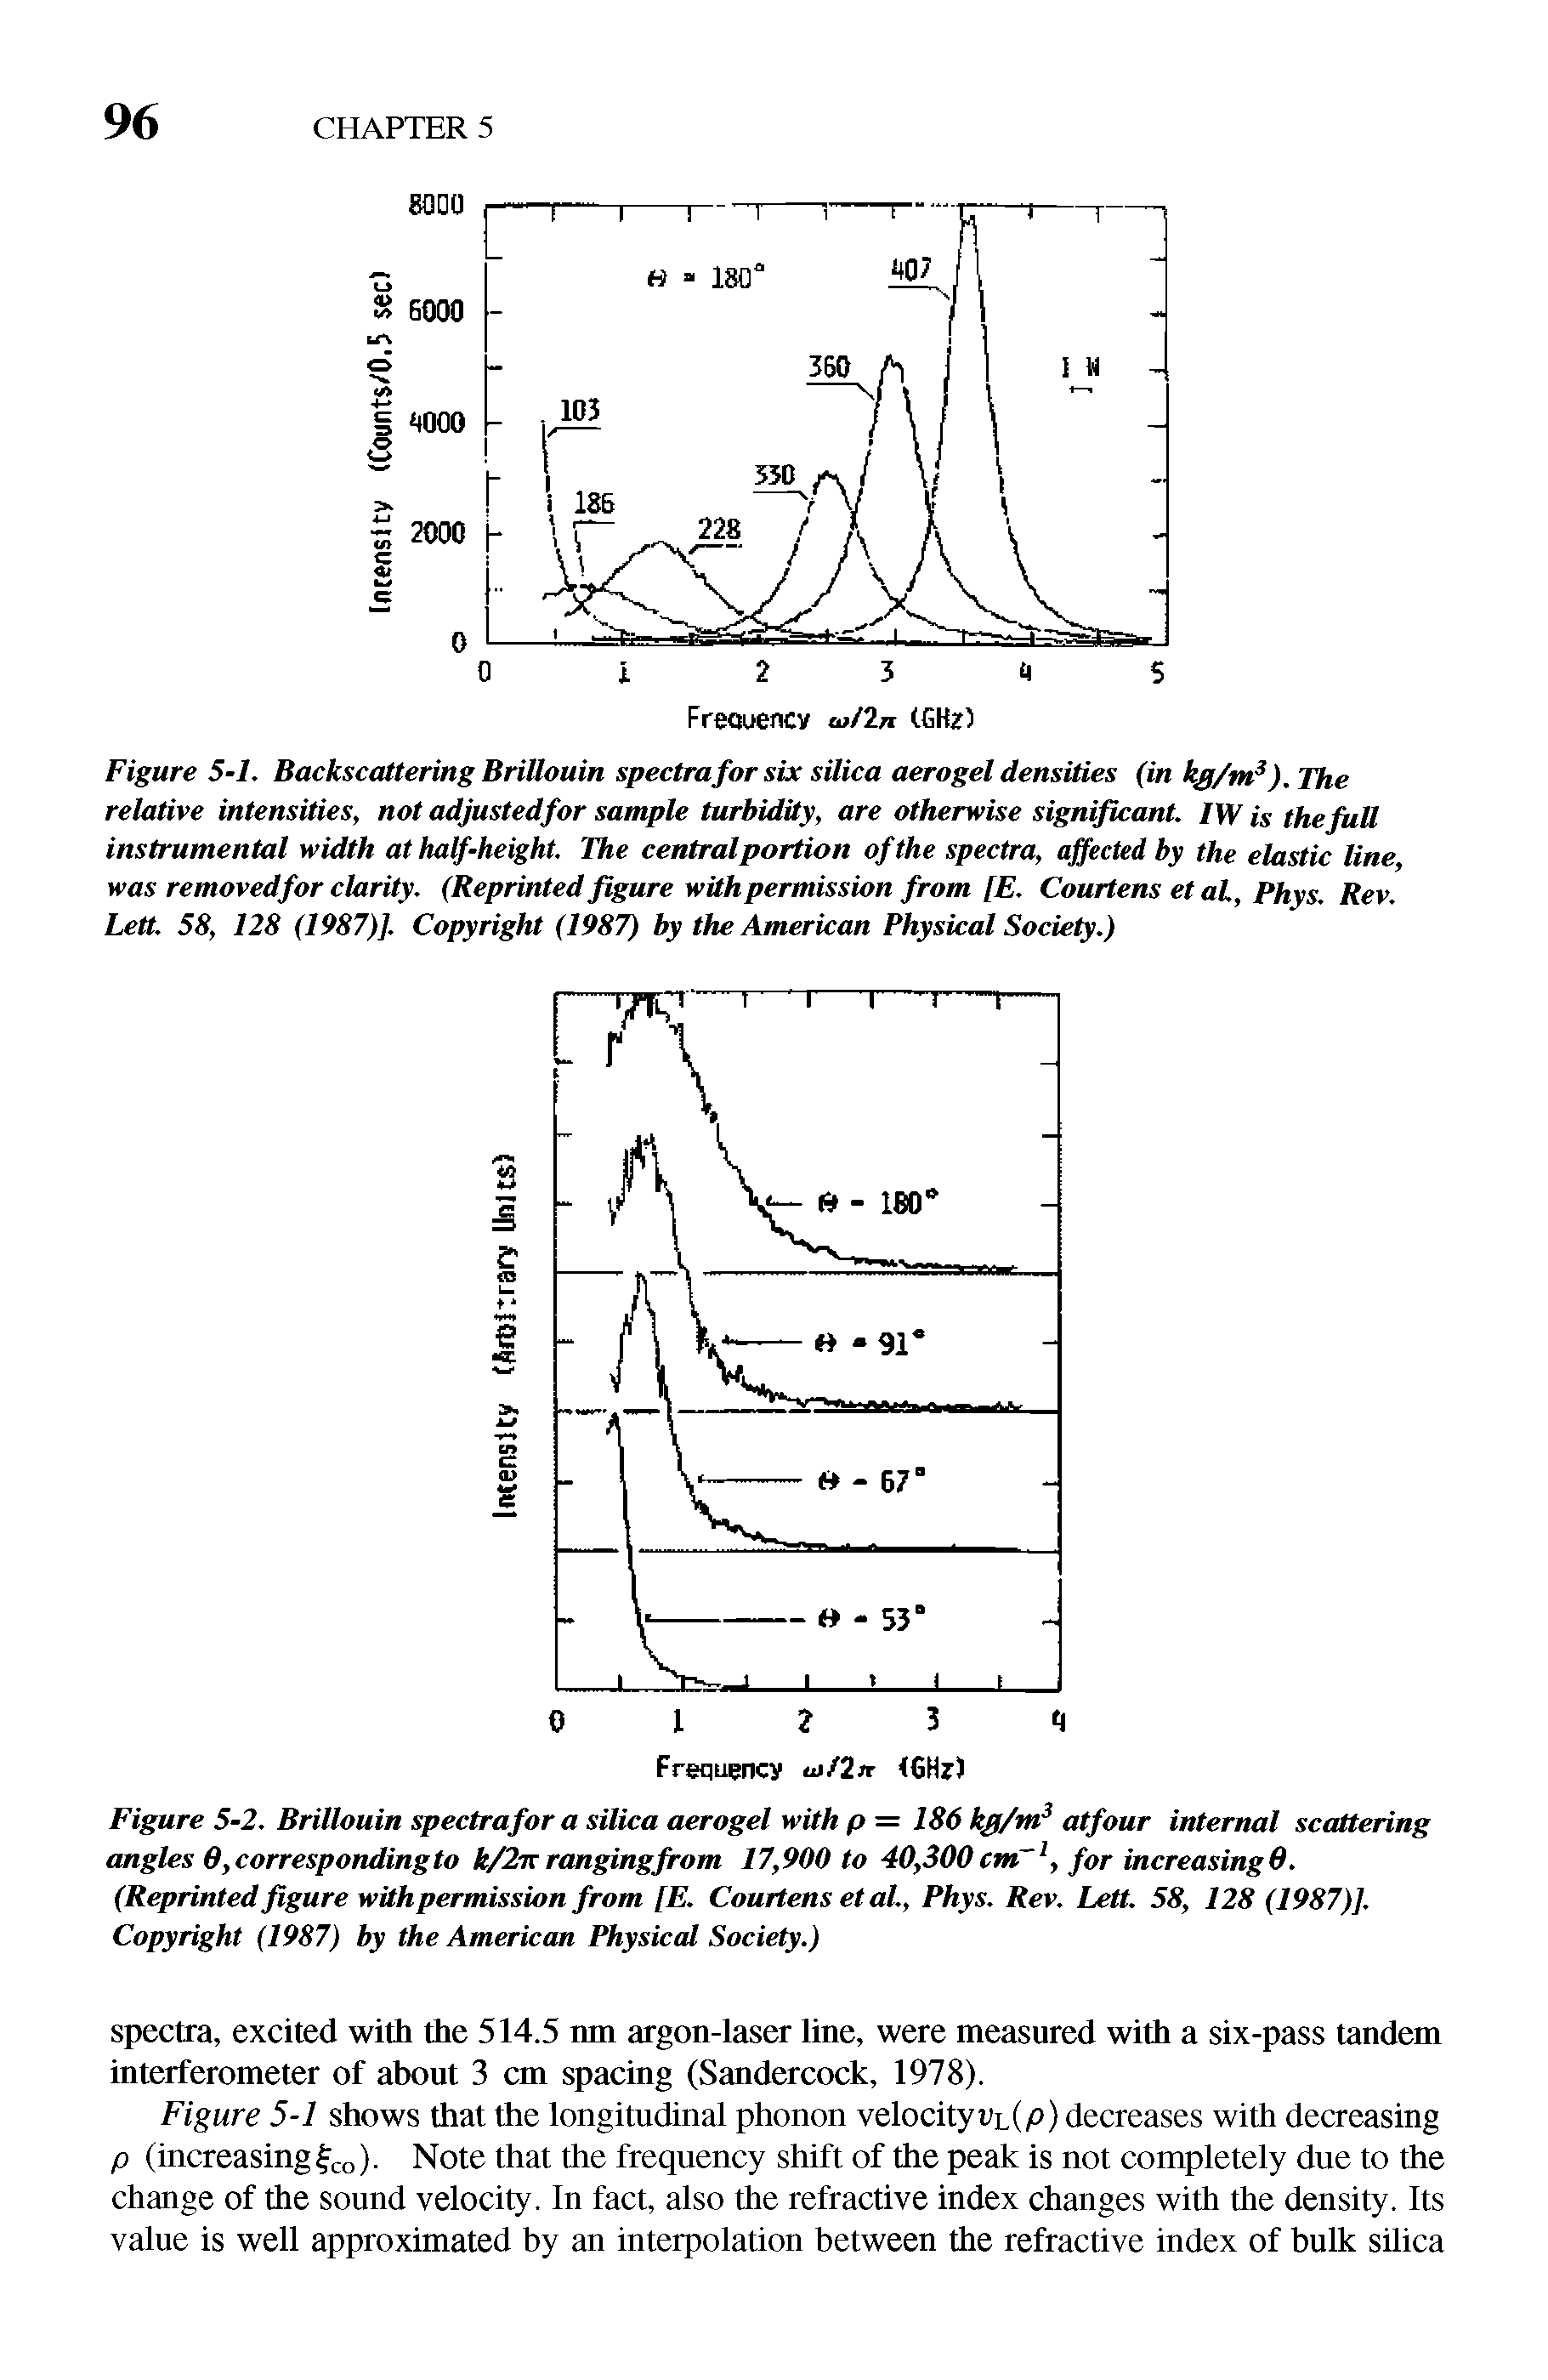 Figure 5-1. Backscattering Brillouin spectra for six silica aerogel densities (in kg/m ).The relative intensities, not adjusted for sample turbidity, are otherwise significant. IW is the full instrumental width at half-height. The central portion of the spectra, affected by the elastic line, was removedfor clarity. (Reprinted figure with permission from [E. Courtens etaL, Phys. Rev. Lett. 58, 128 (1987)]. Copyright (1987) by the American Physical Society.)...